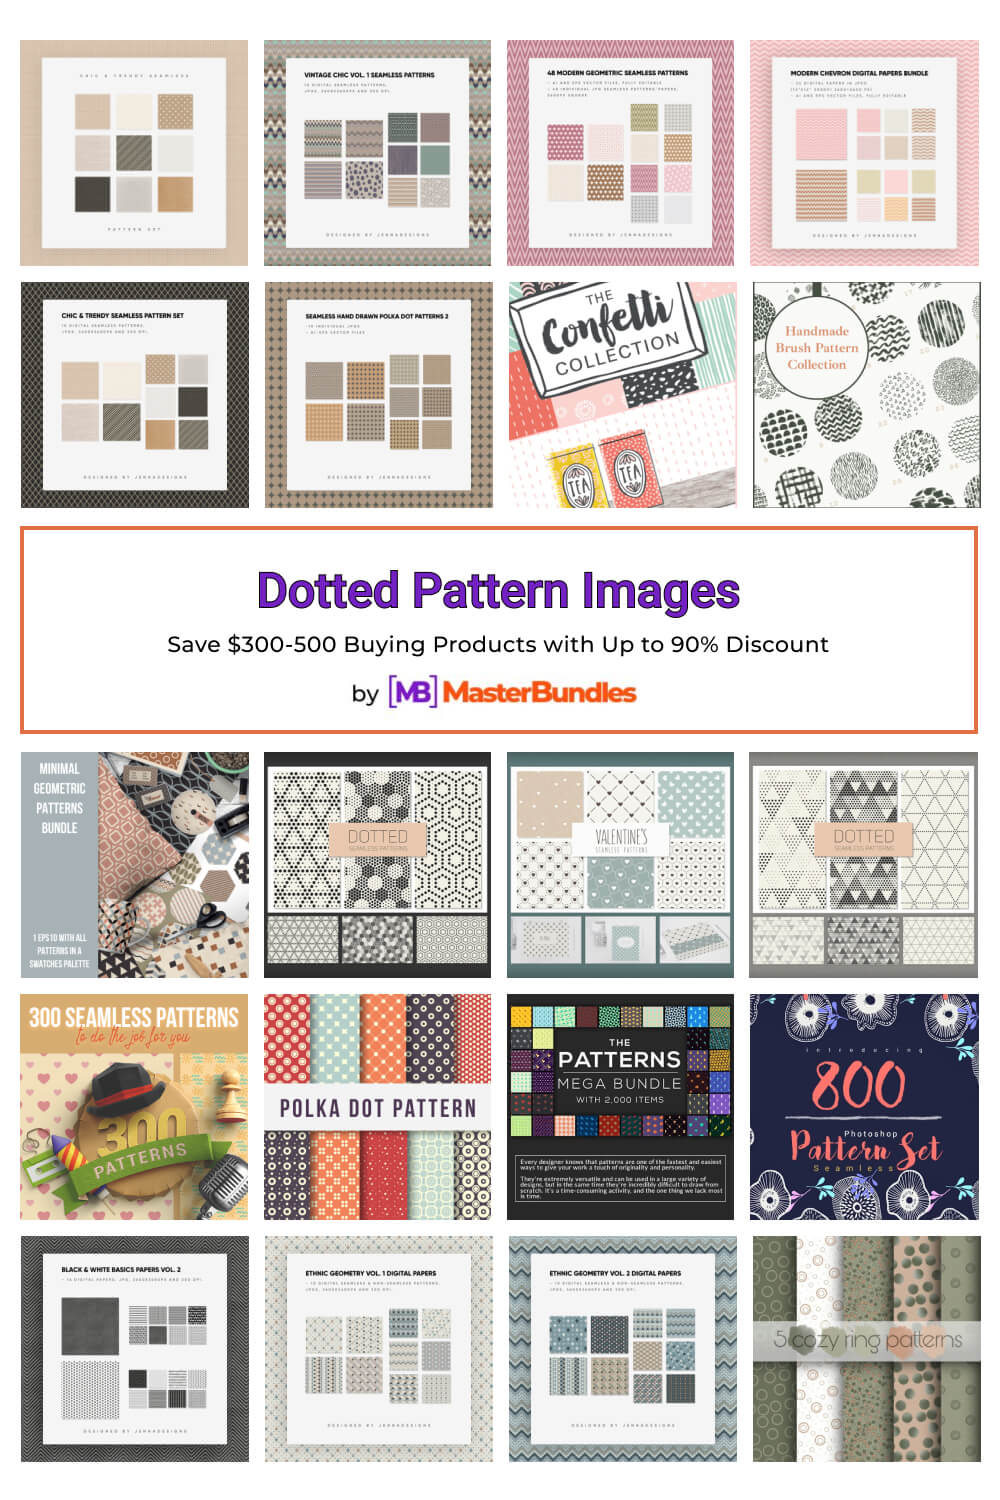 dotted pattern images pinterest image.